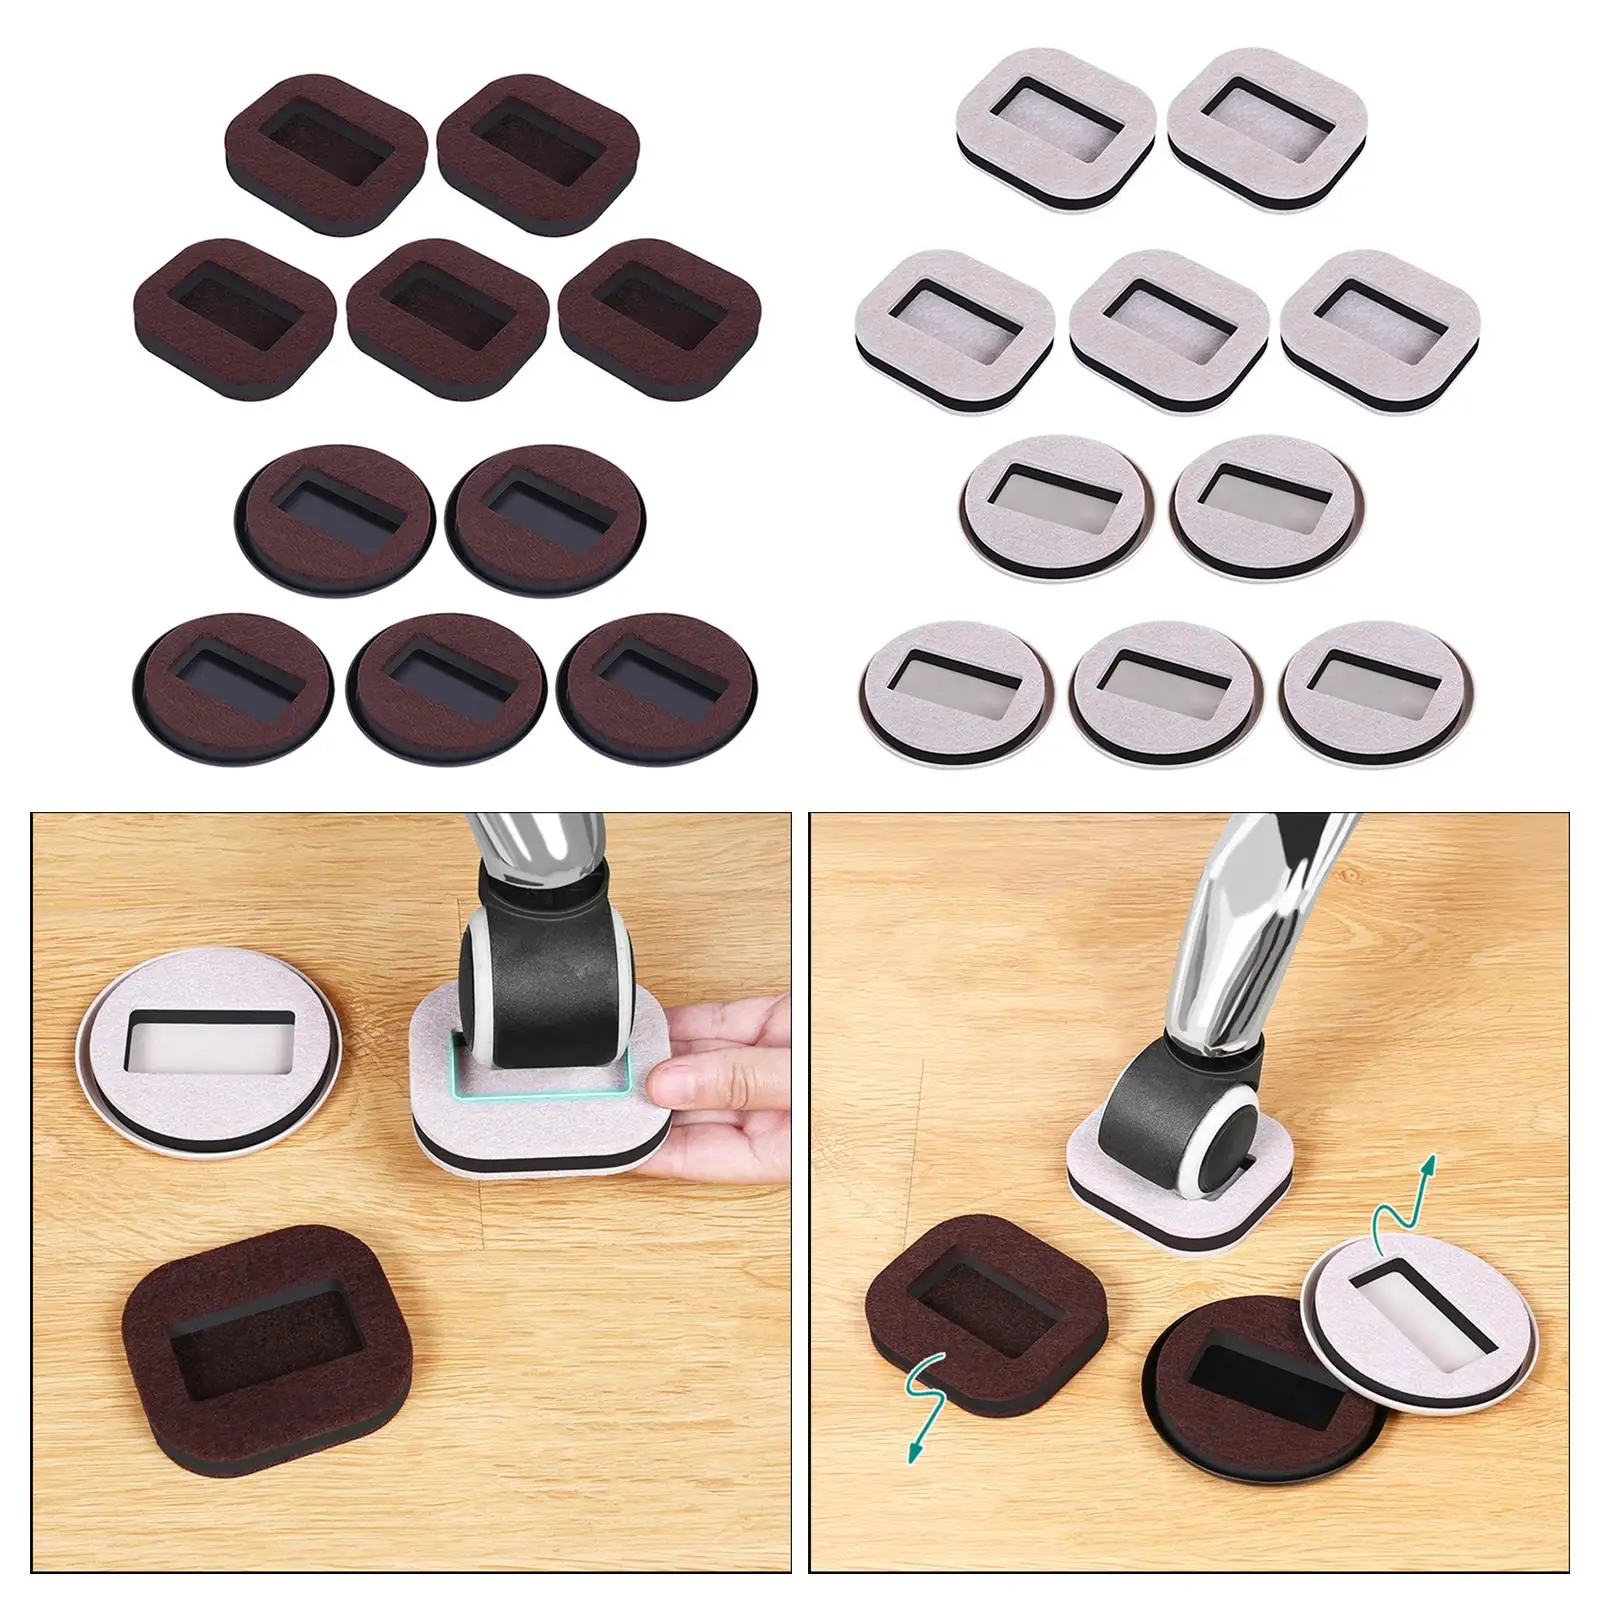 5x Furniture Cups Protect Any Flooring Wheel Fixing Pad Non-skid